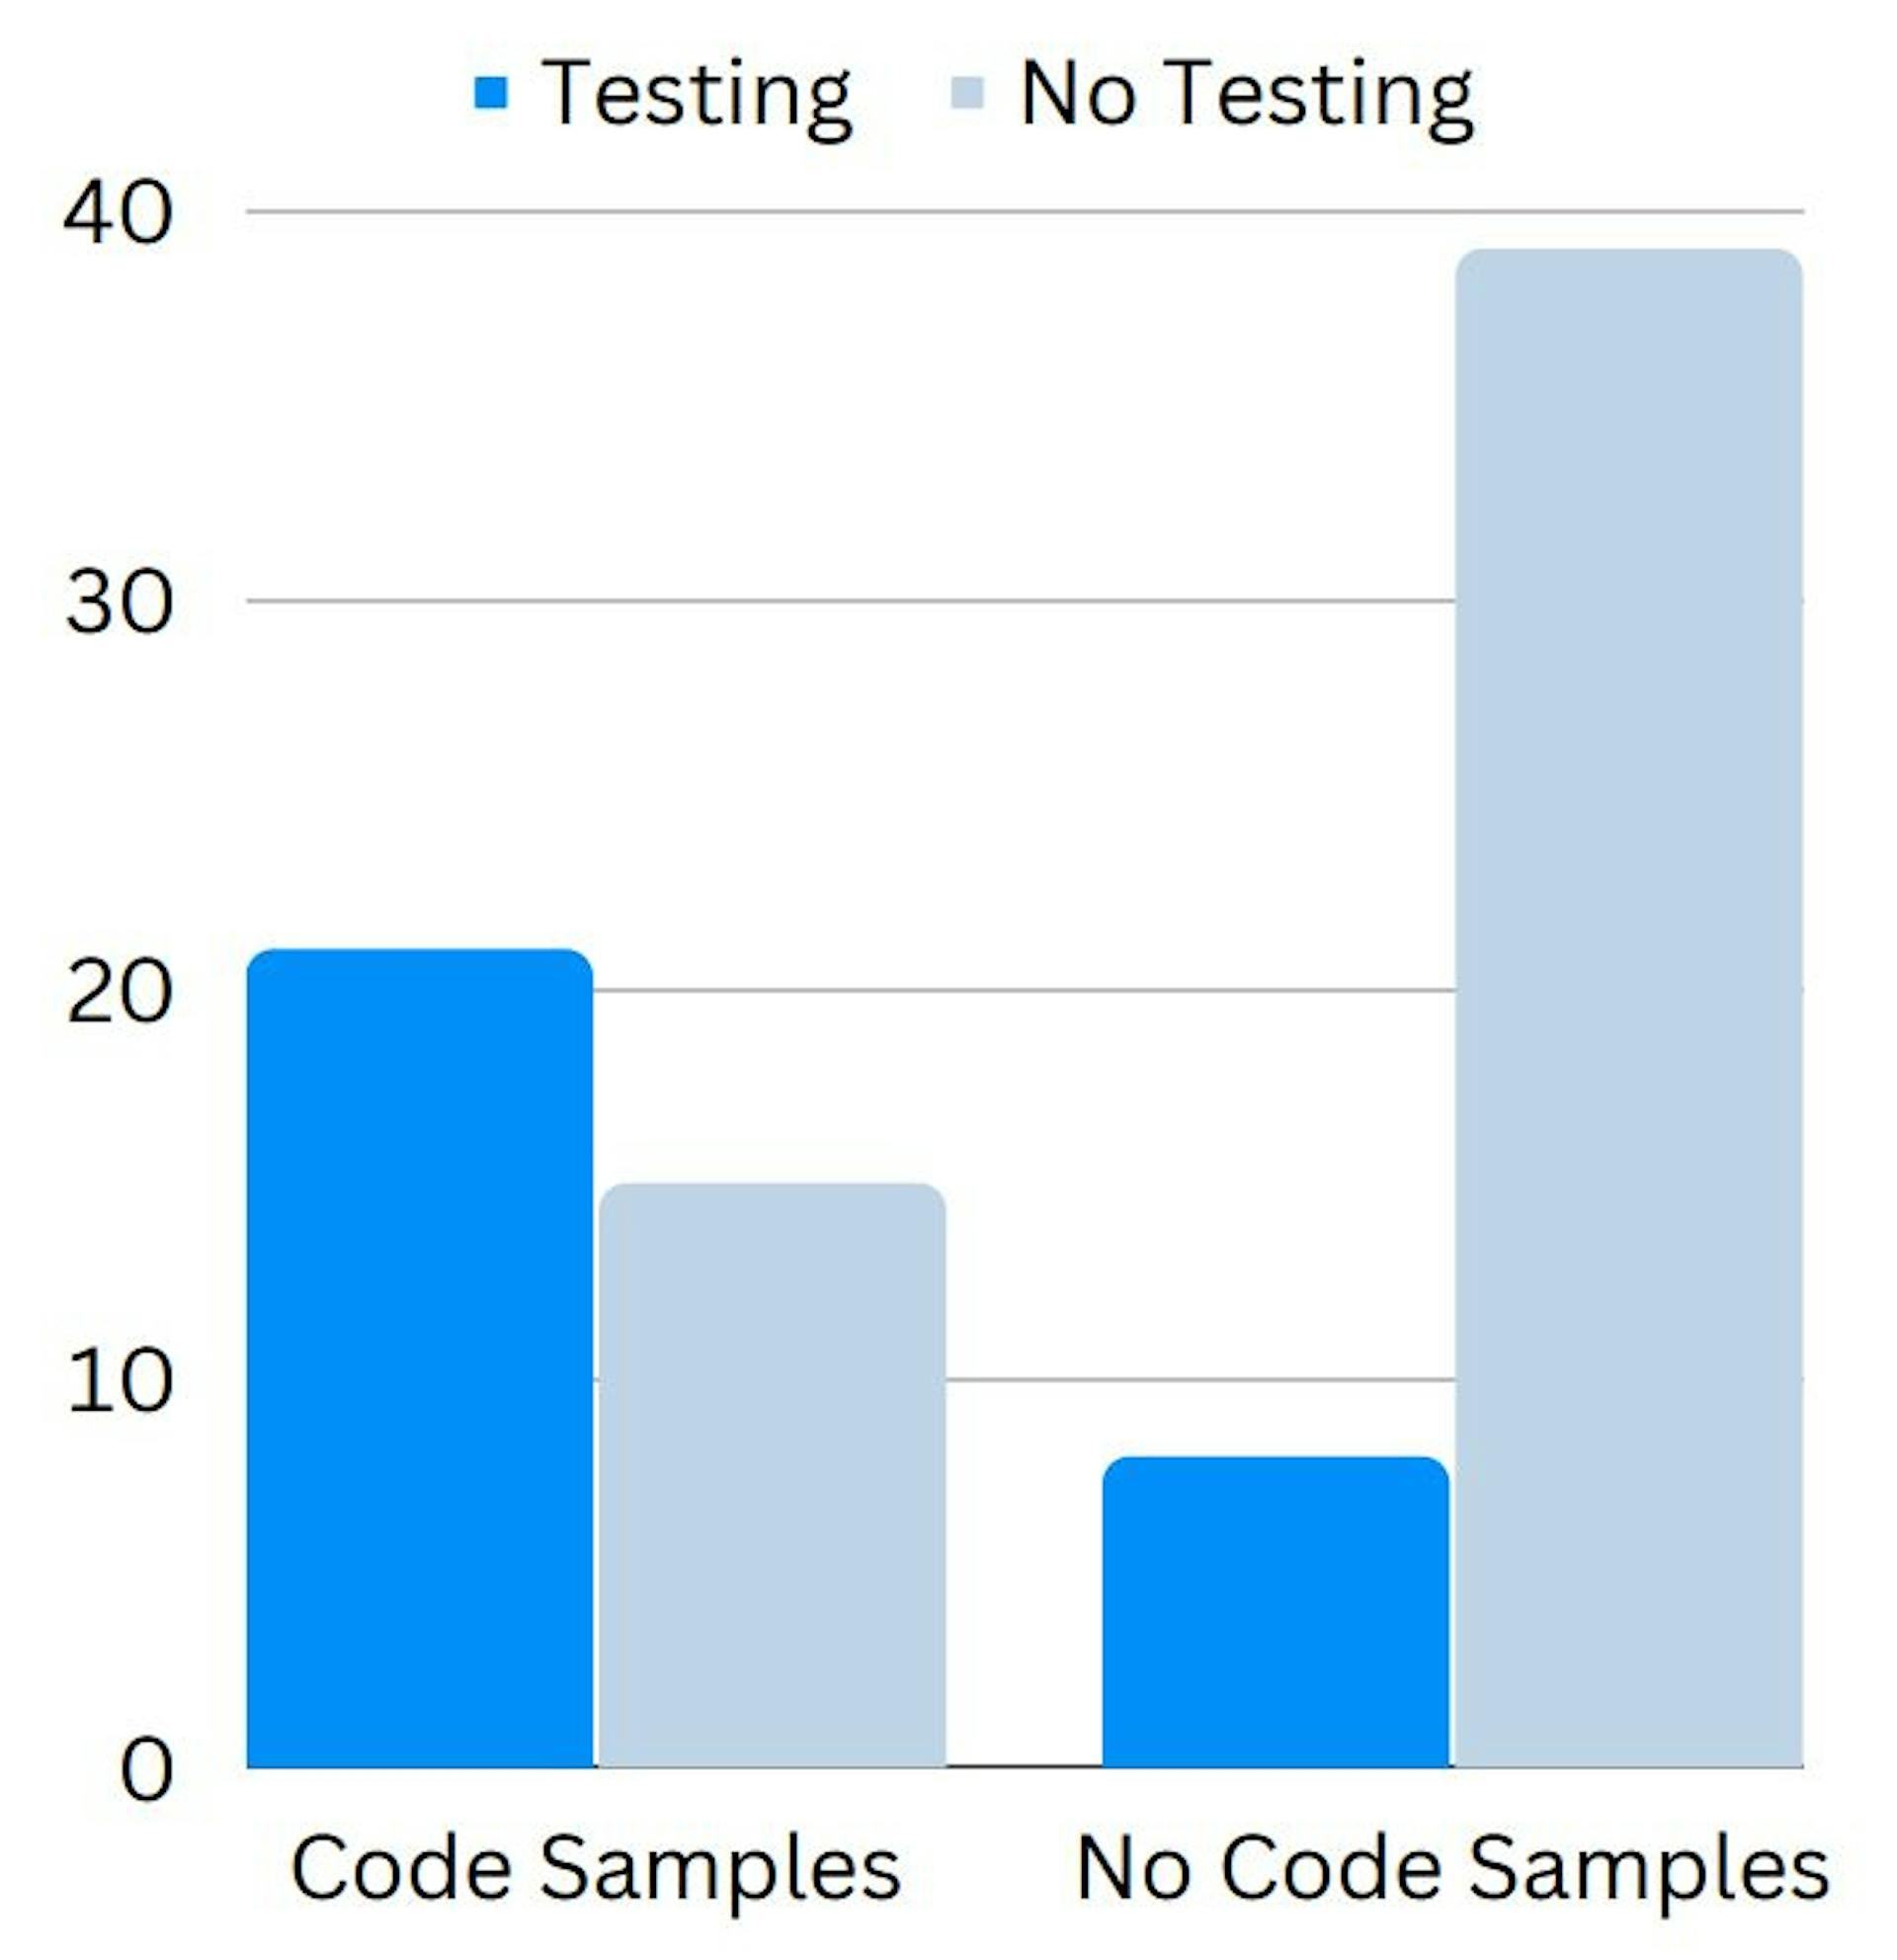 72% of those with code samples in their docs also provided testing guidance.